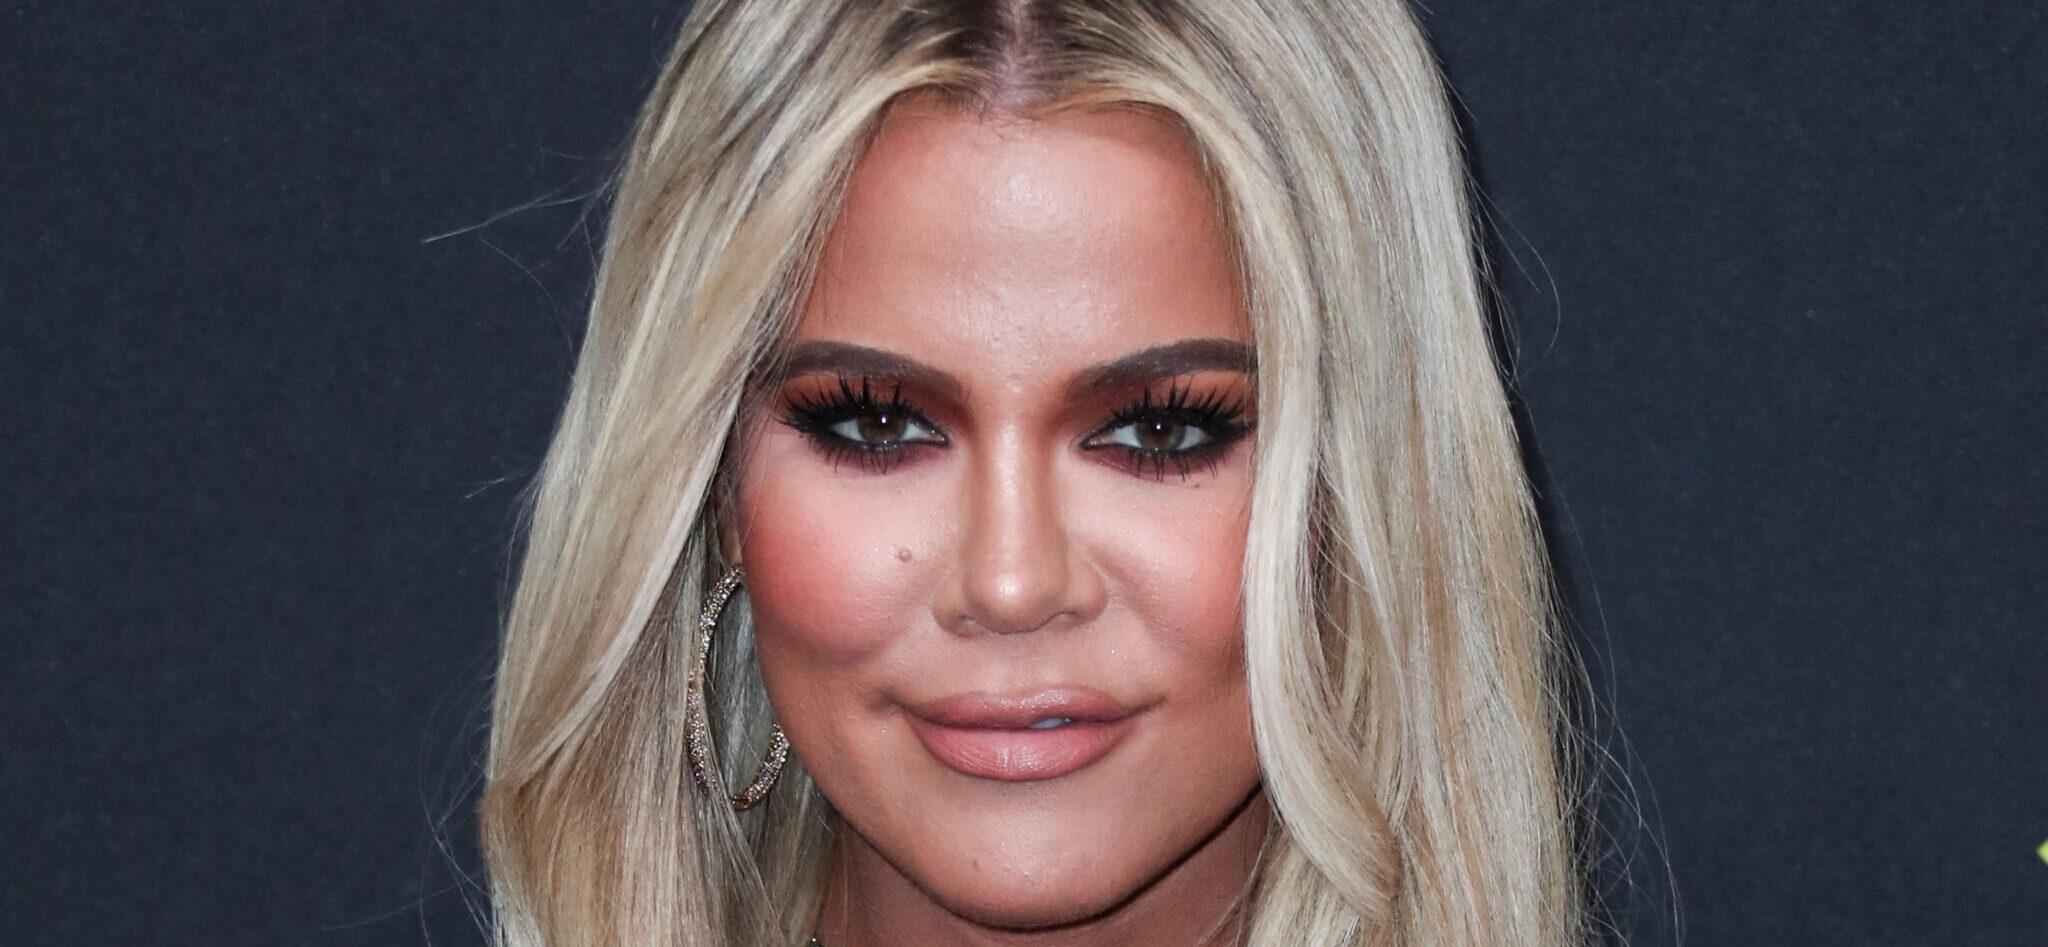 Khloe Kardashian’s Good American Sued For ‘Wrongful Termination’ By Cancer Victim